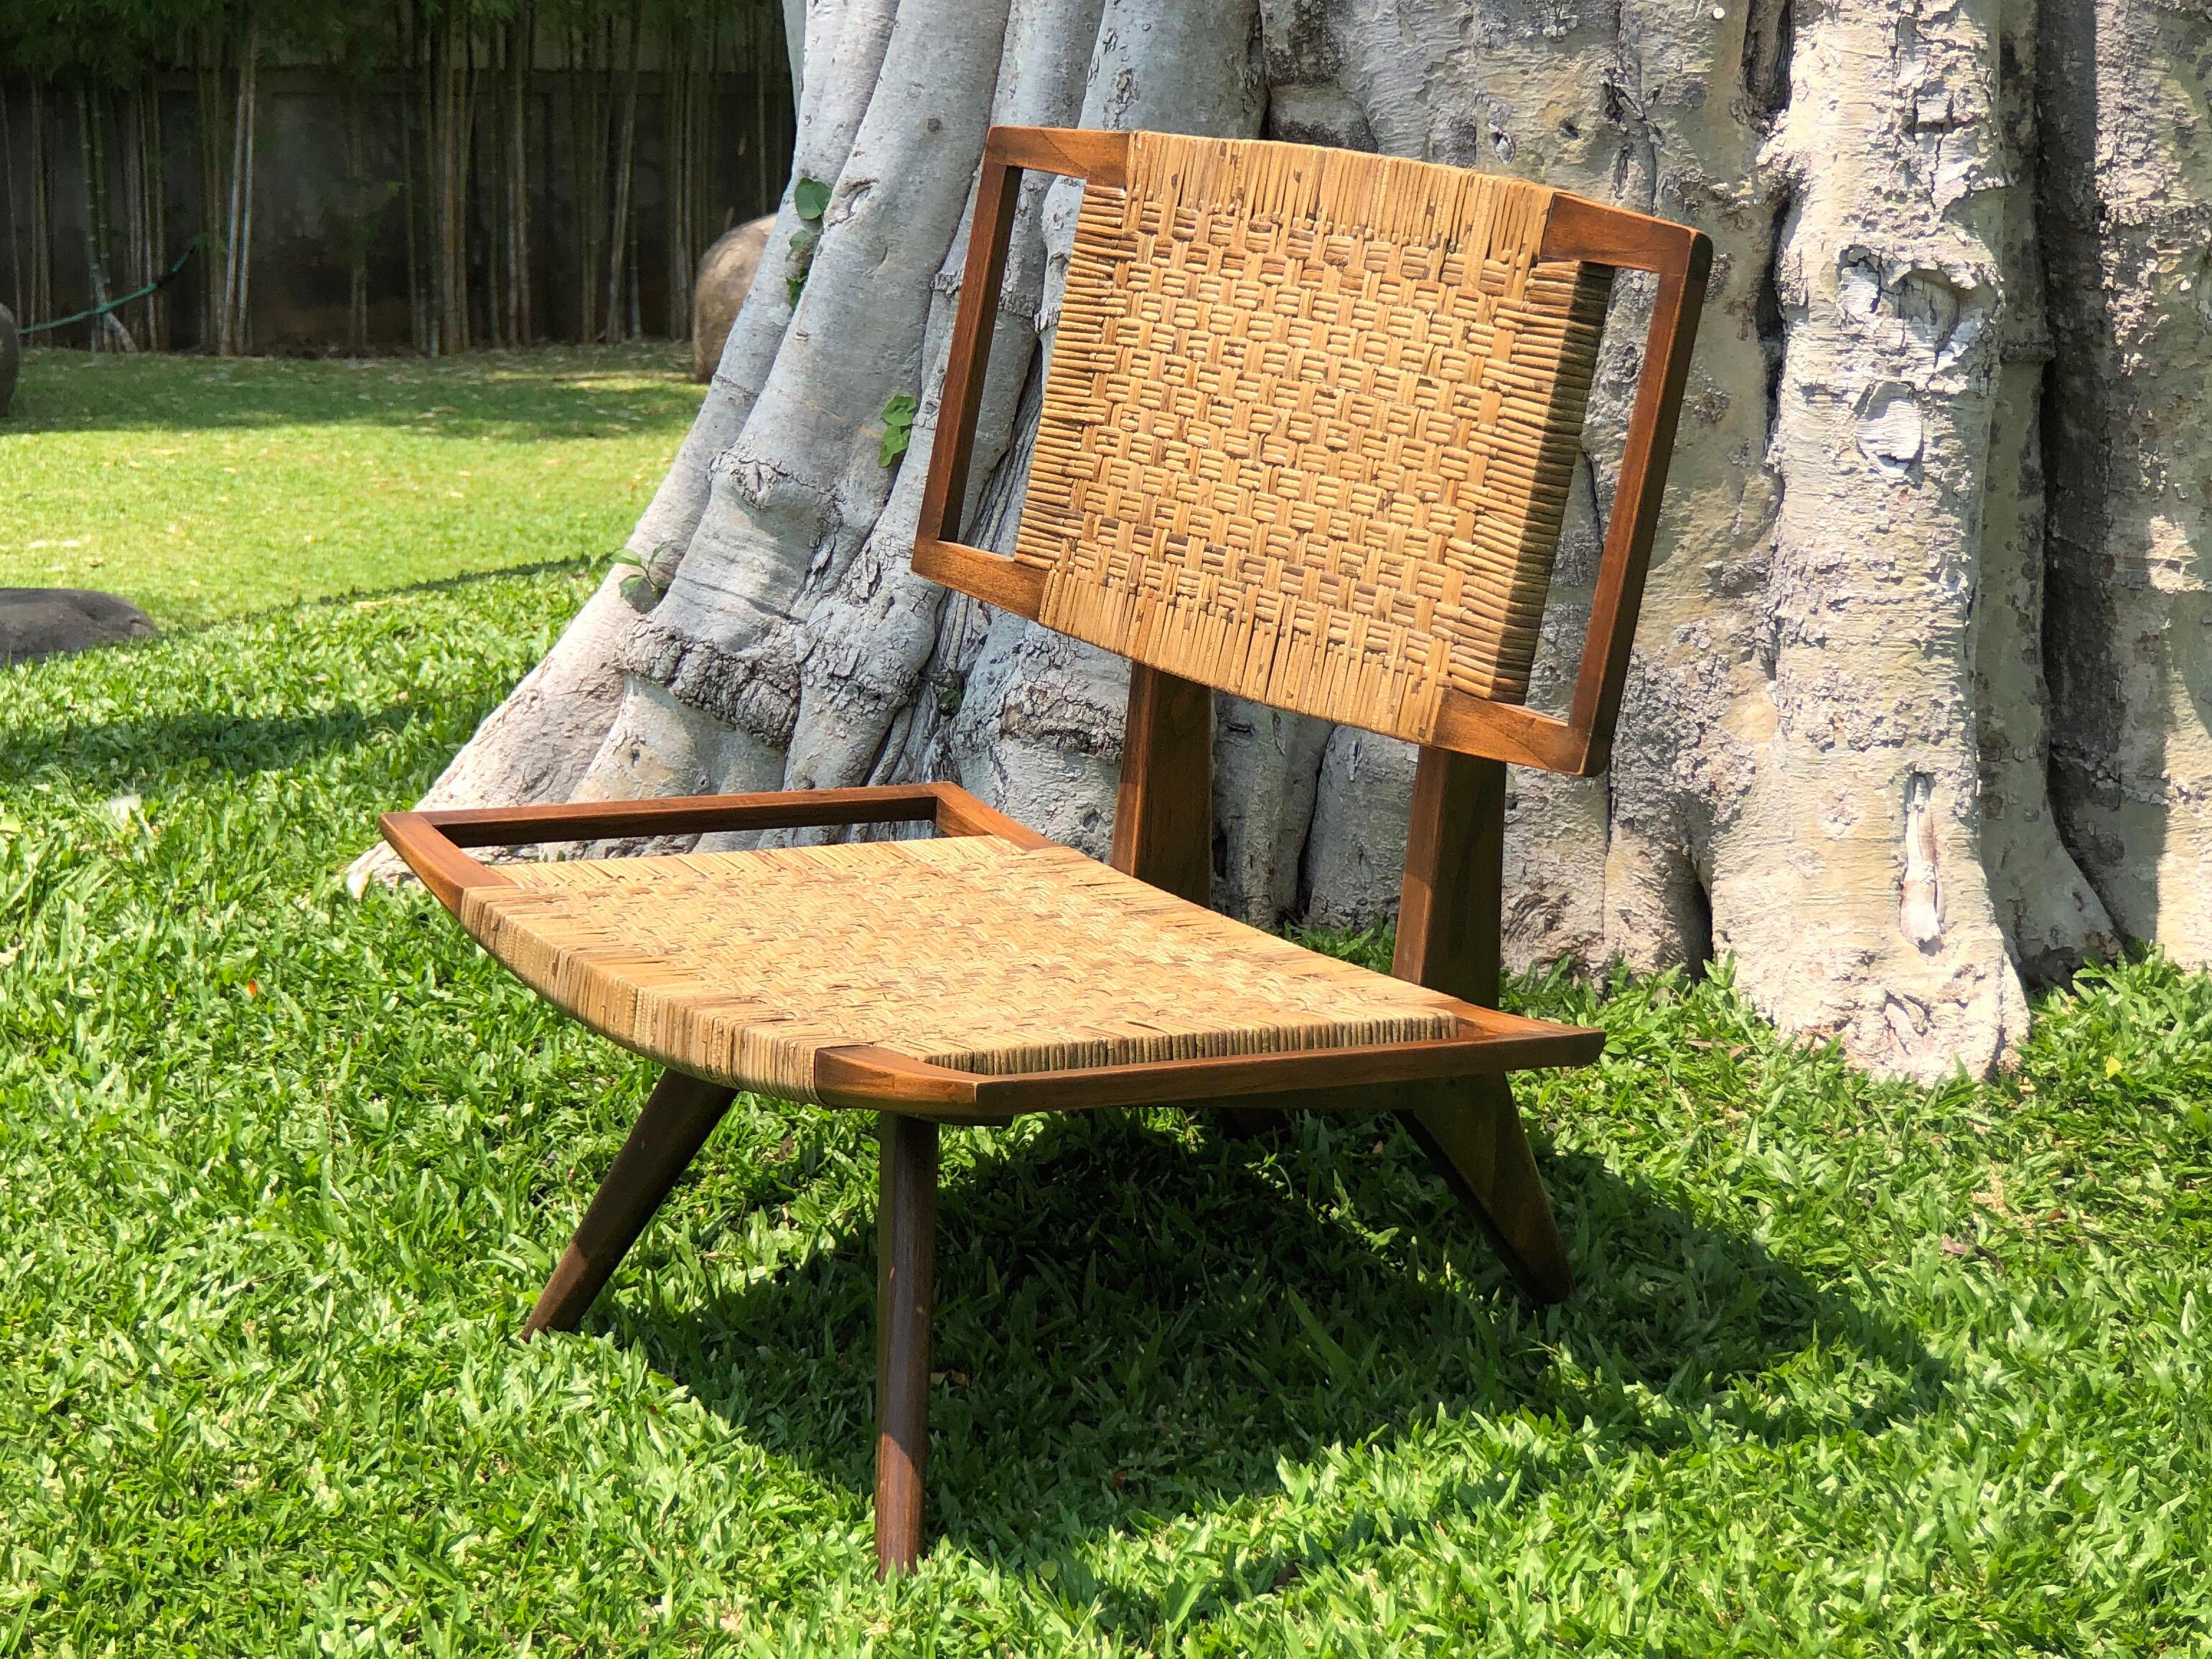 Pair of Colonial Art Deco Teak Chairs with Rattan from Burma or Myanmar, 1940 For Sale 5